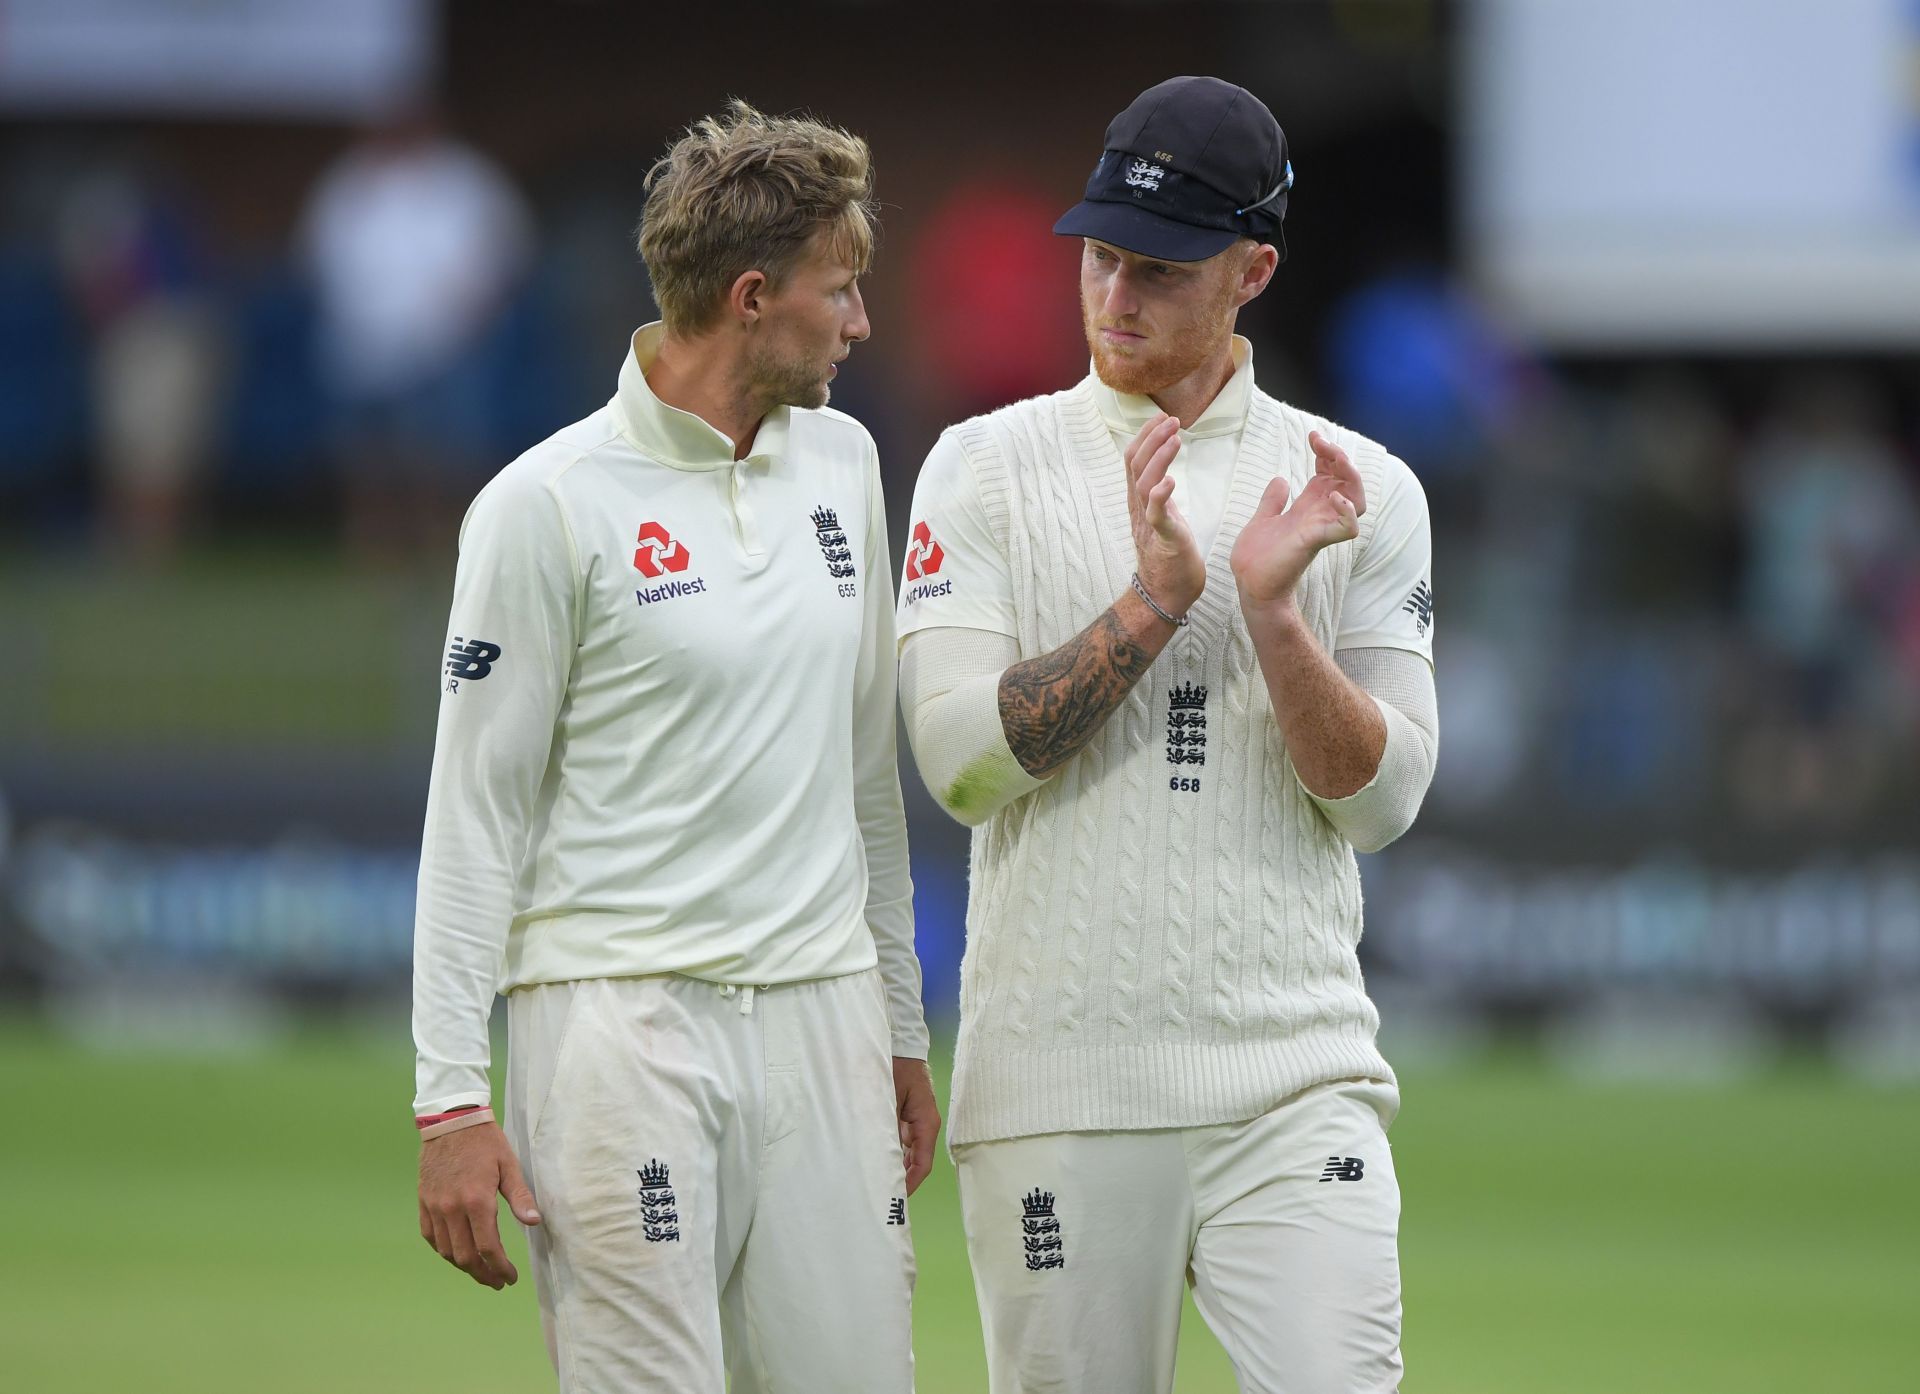 Joe Root and Ben Stokes (Credit: Getty Images)